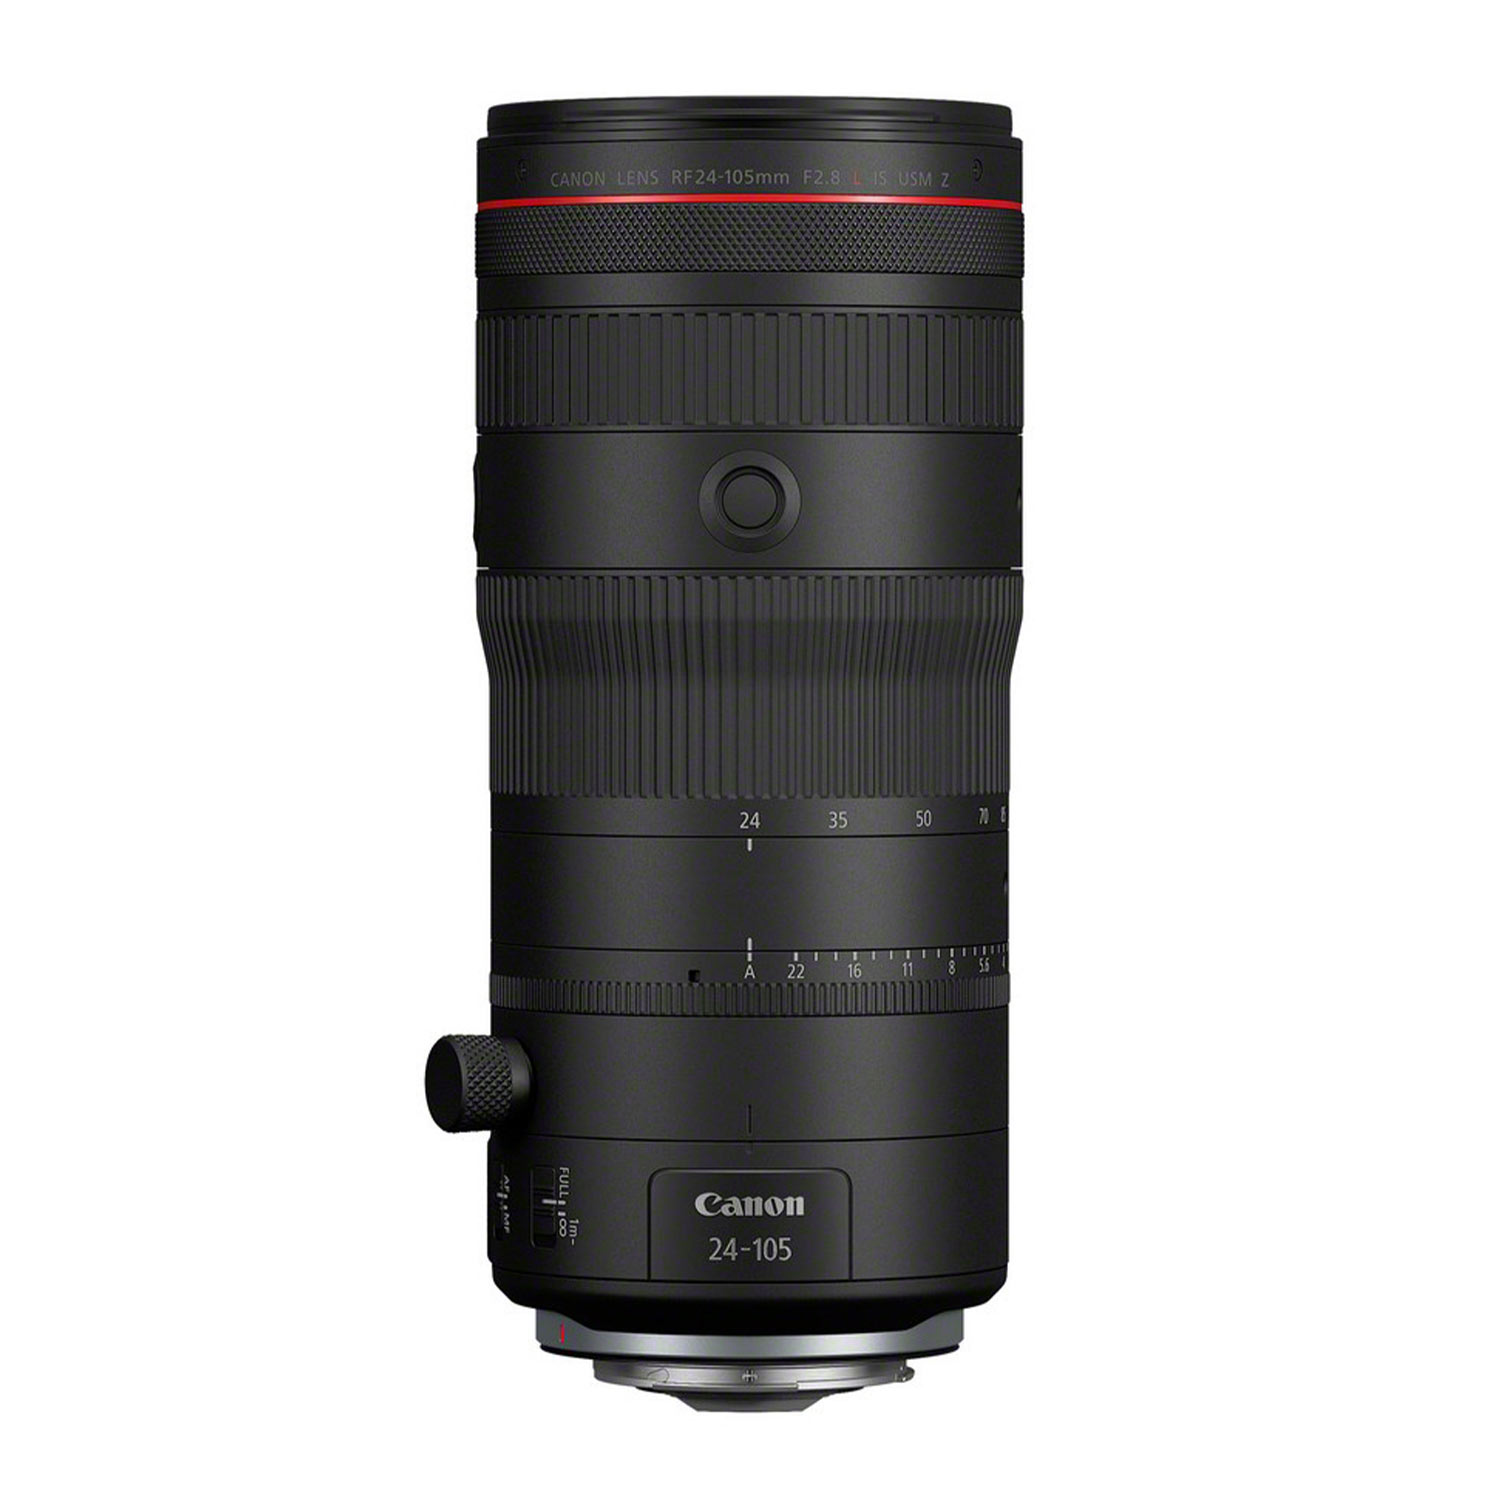 Canon RF 24-105mm 1:2,8 L IS USM Z